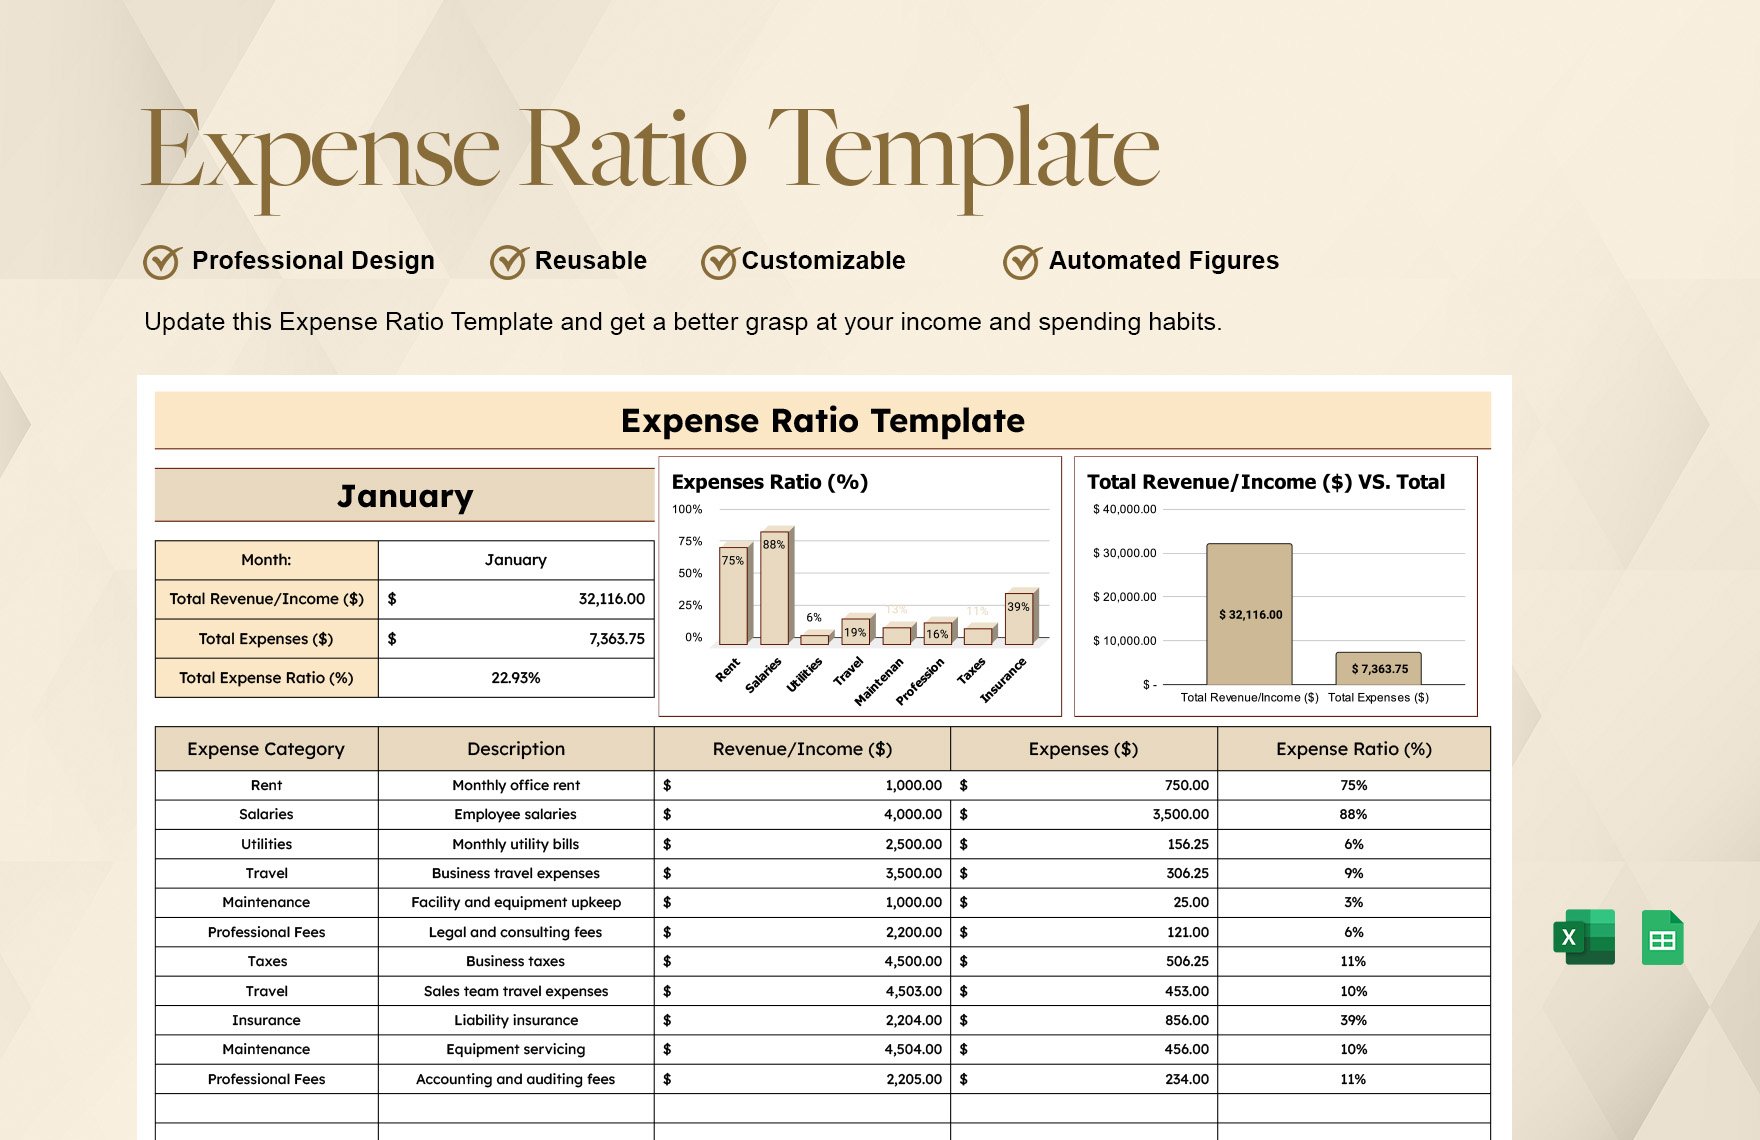 Expense Ratio Template in Excel, Google Sheets